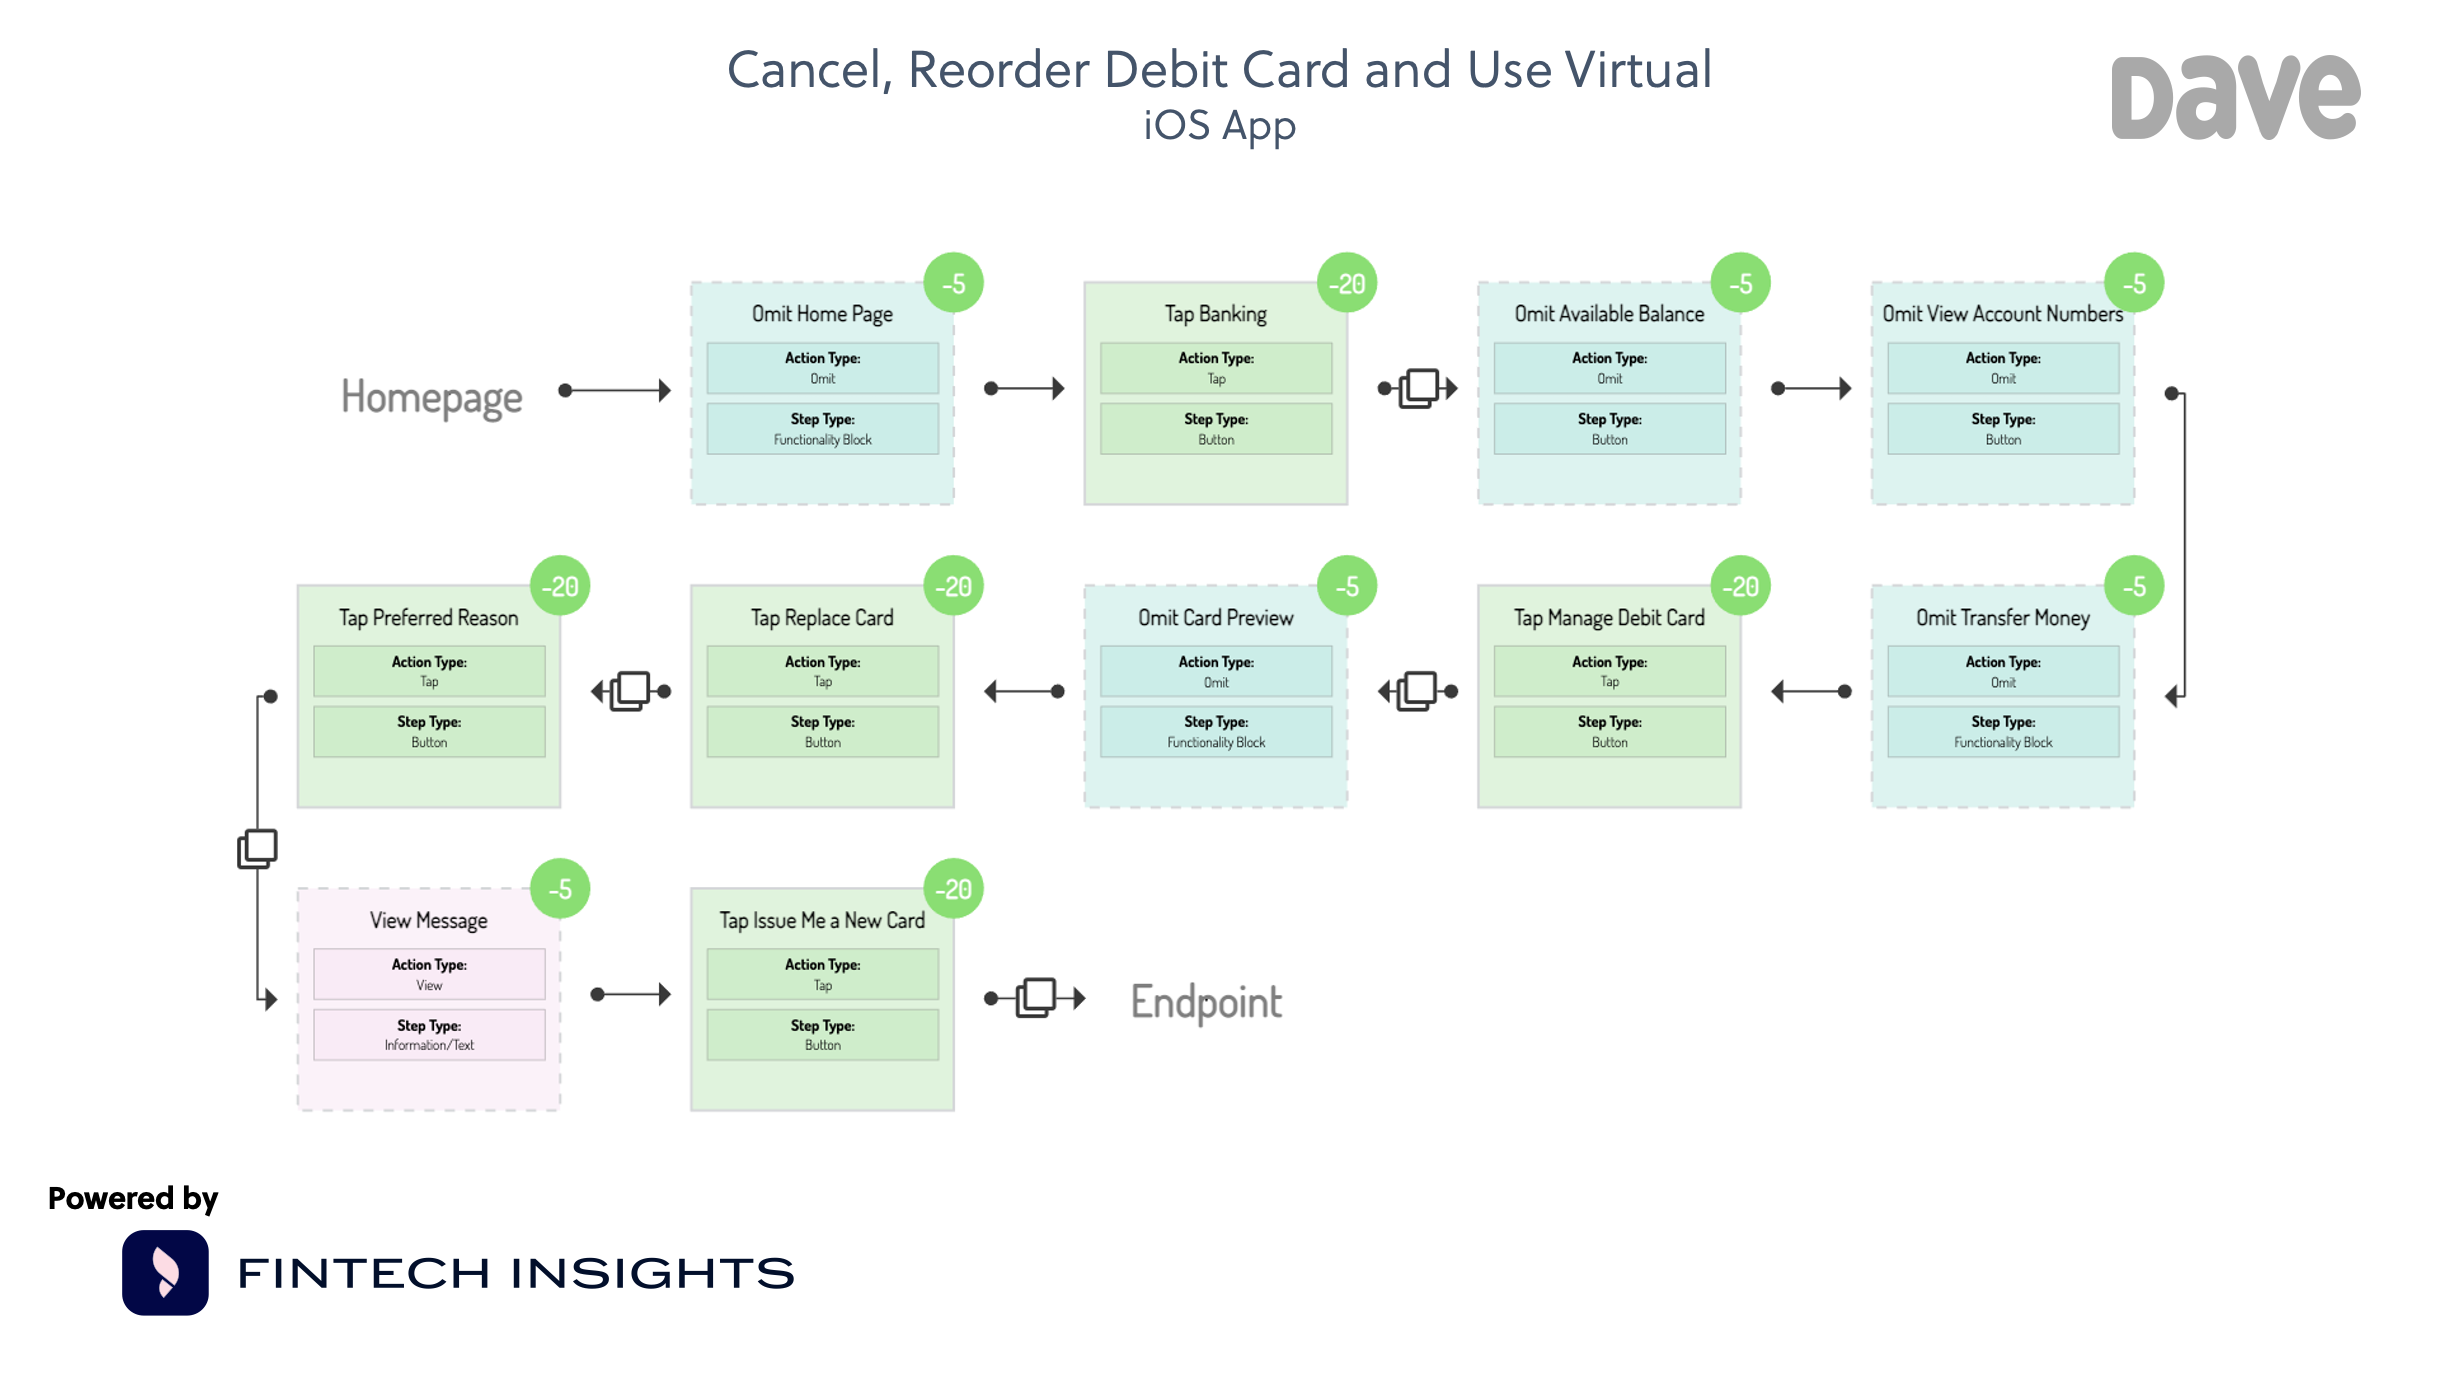 Dave Cancel, Reorder Card and Use Virtual